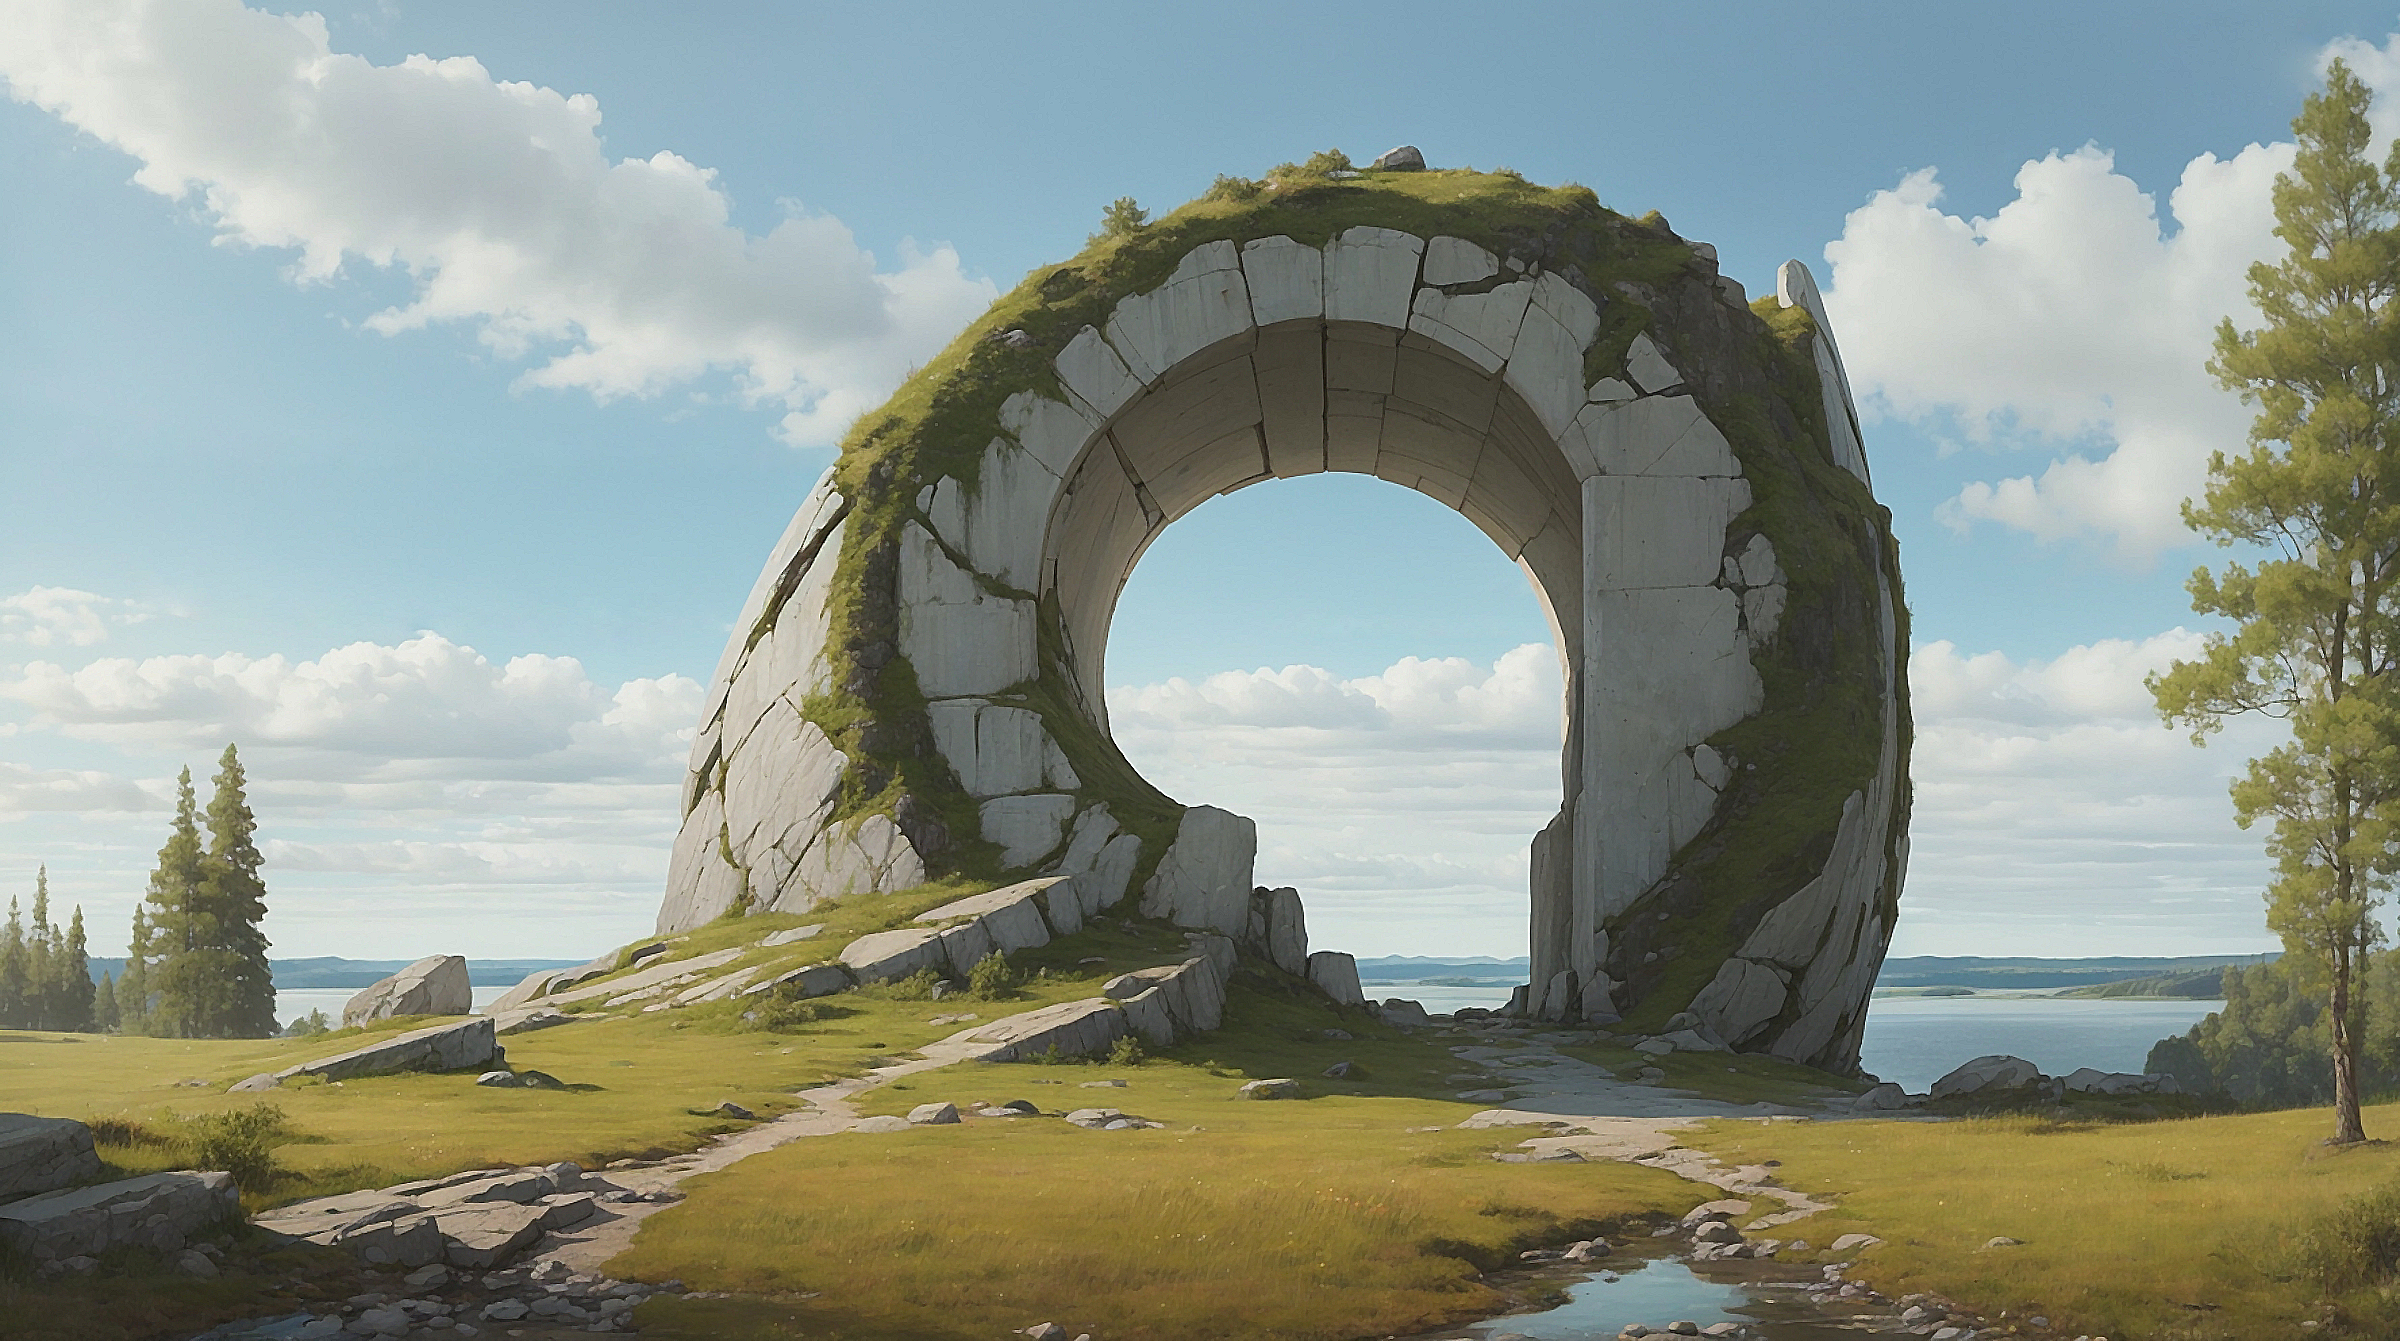 Nature Science Fiction Ruins Landscape Stone Arch Overgrown Rocks Sky Clouds Water Grass Trees 2400x1341